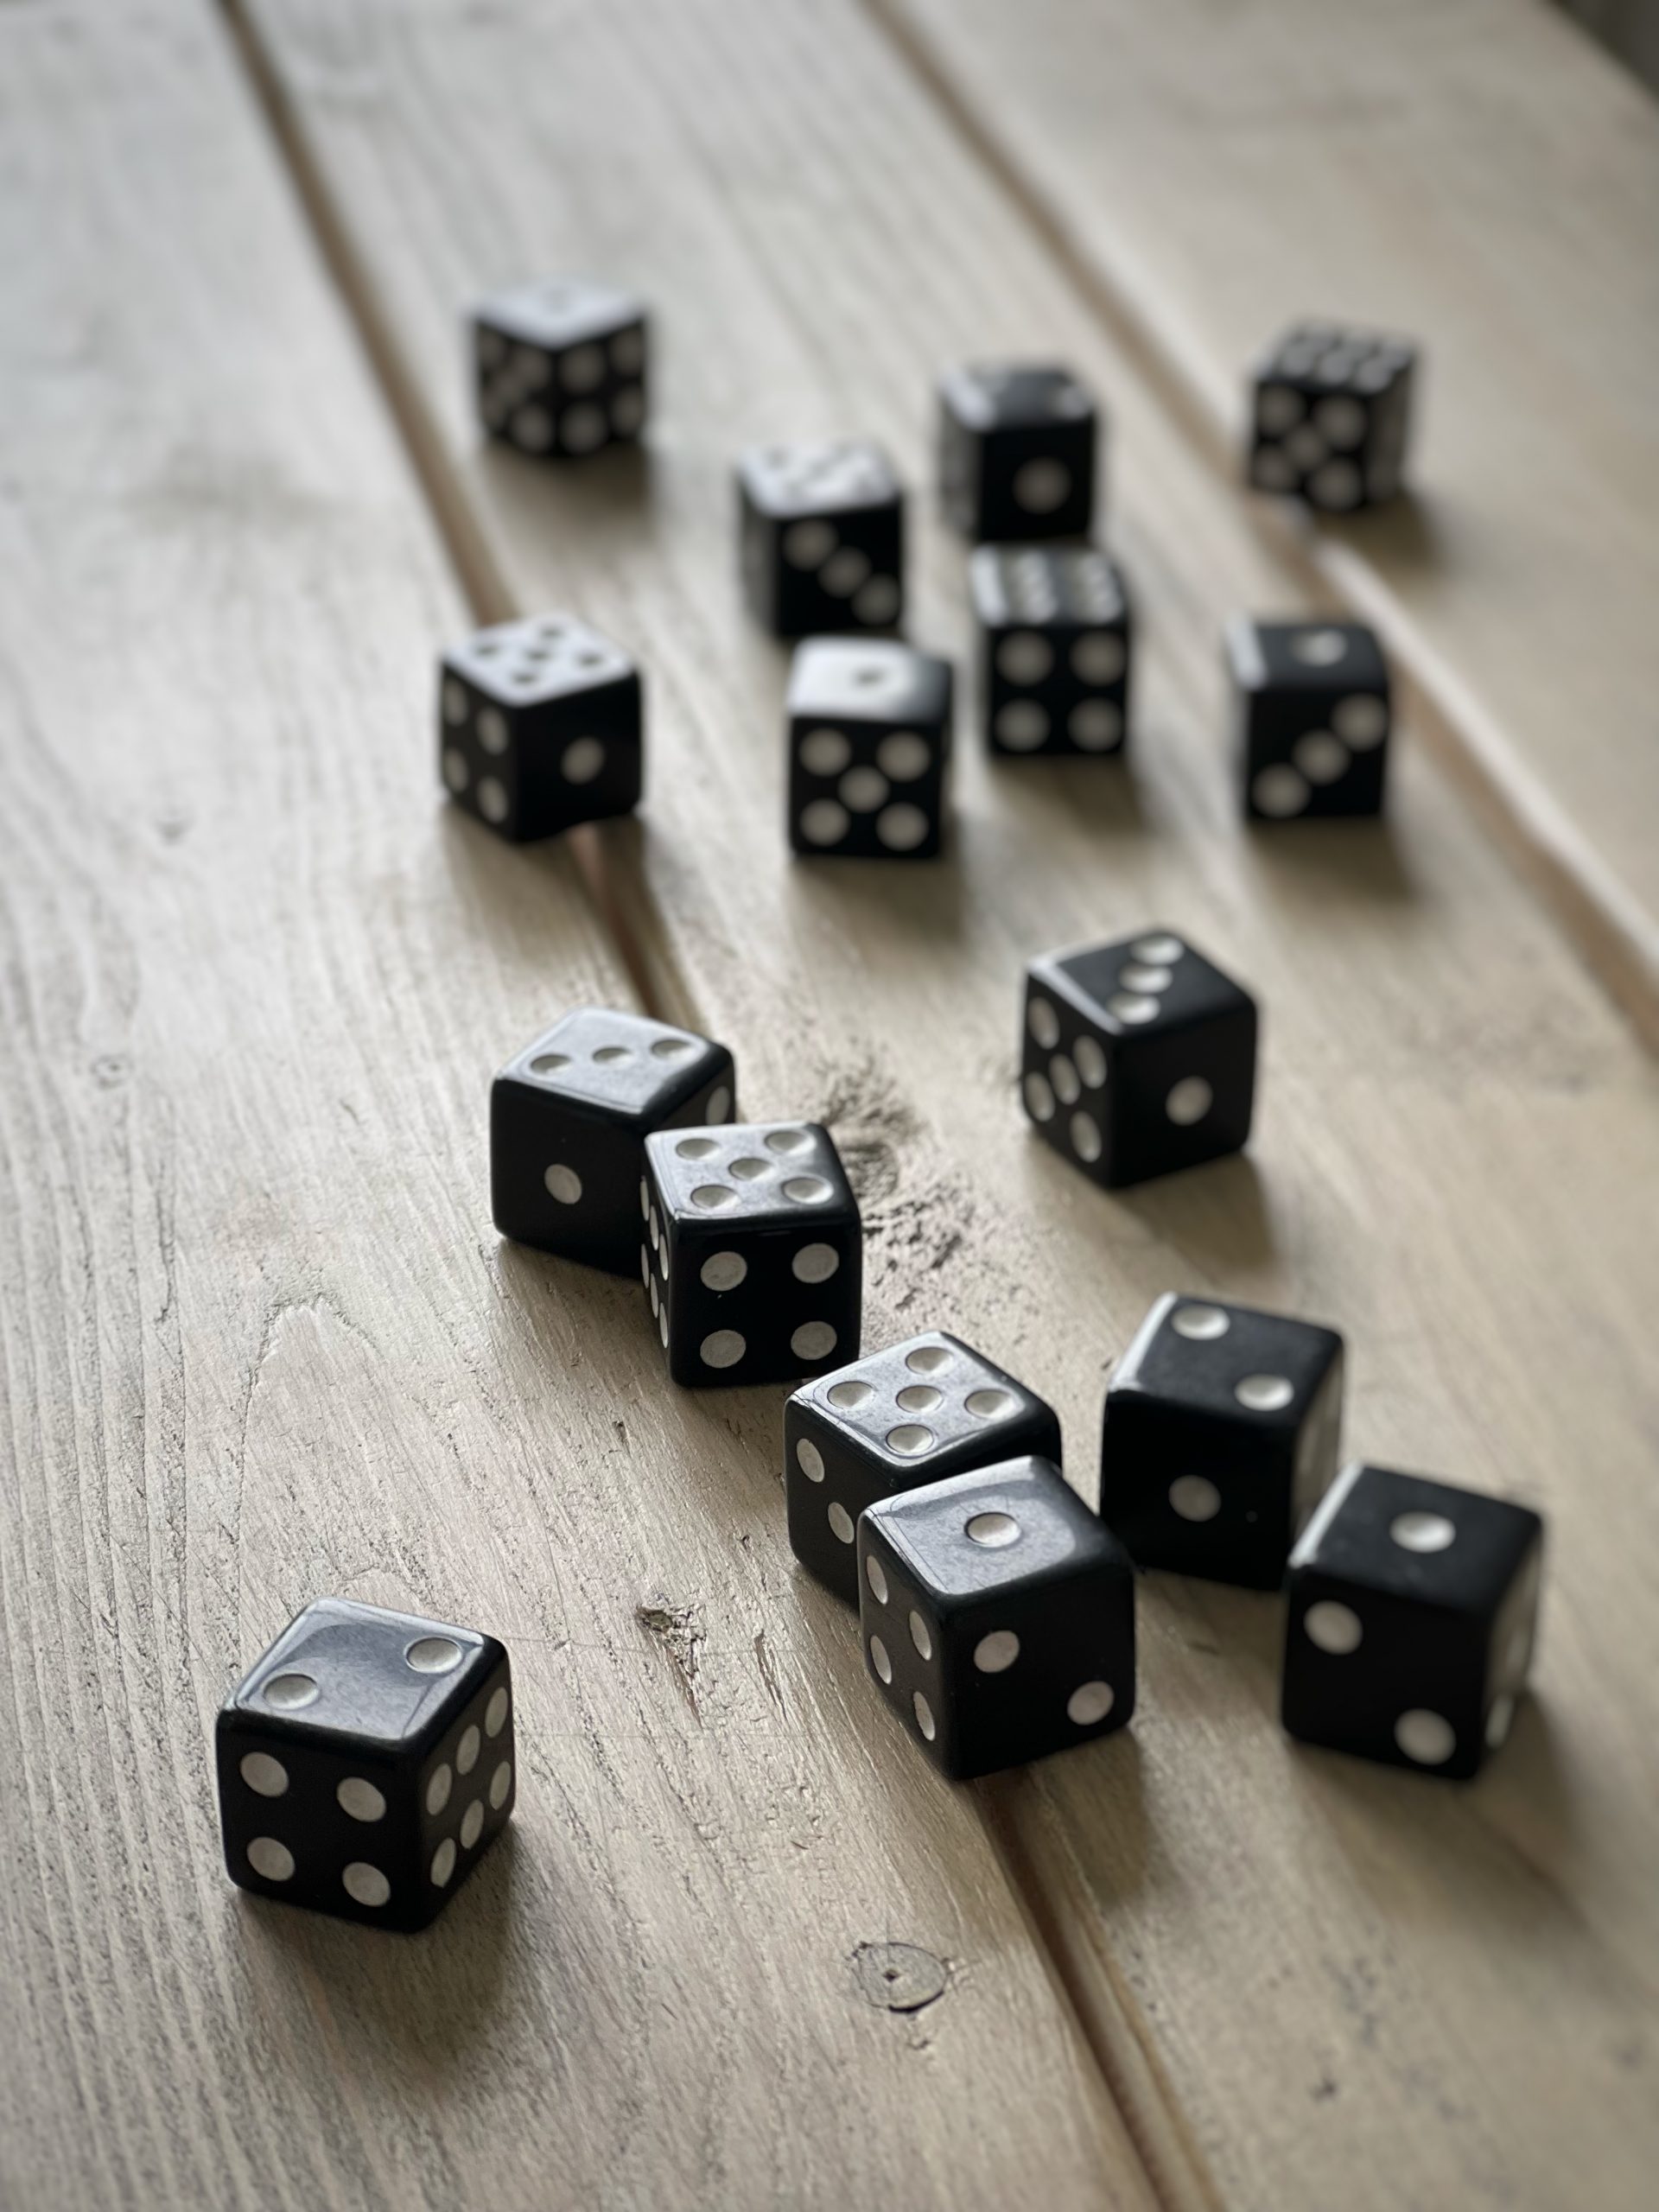 Dice are just one way to make math facts fun for kids.